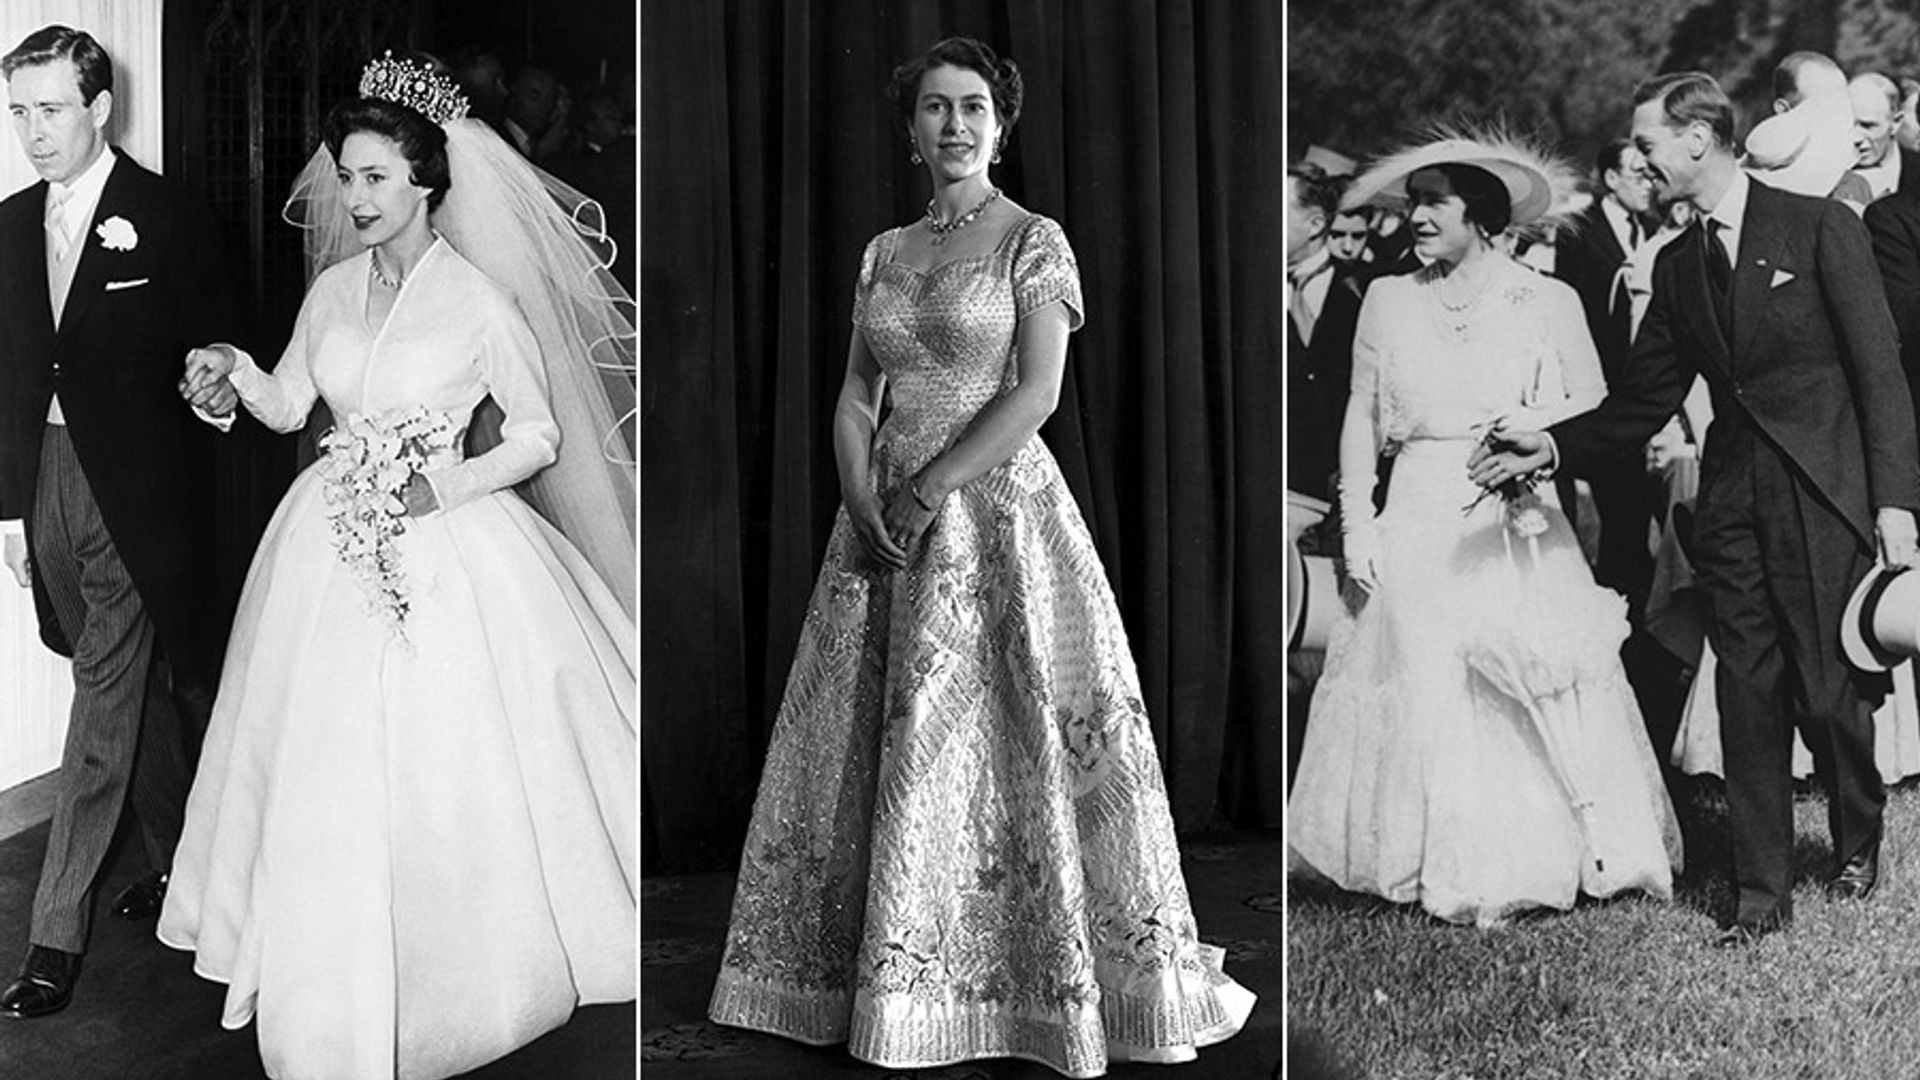 Other royals who have worn beautiful Norman Hartnell designs, from the Queen to Princess Margaret